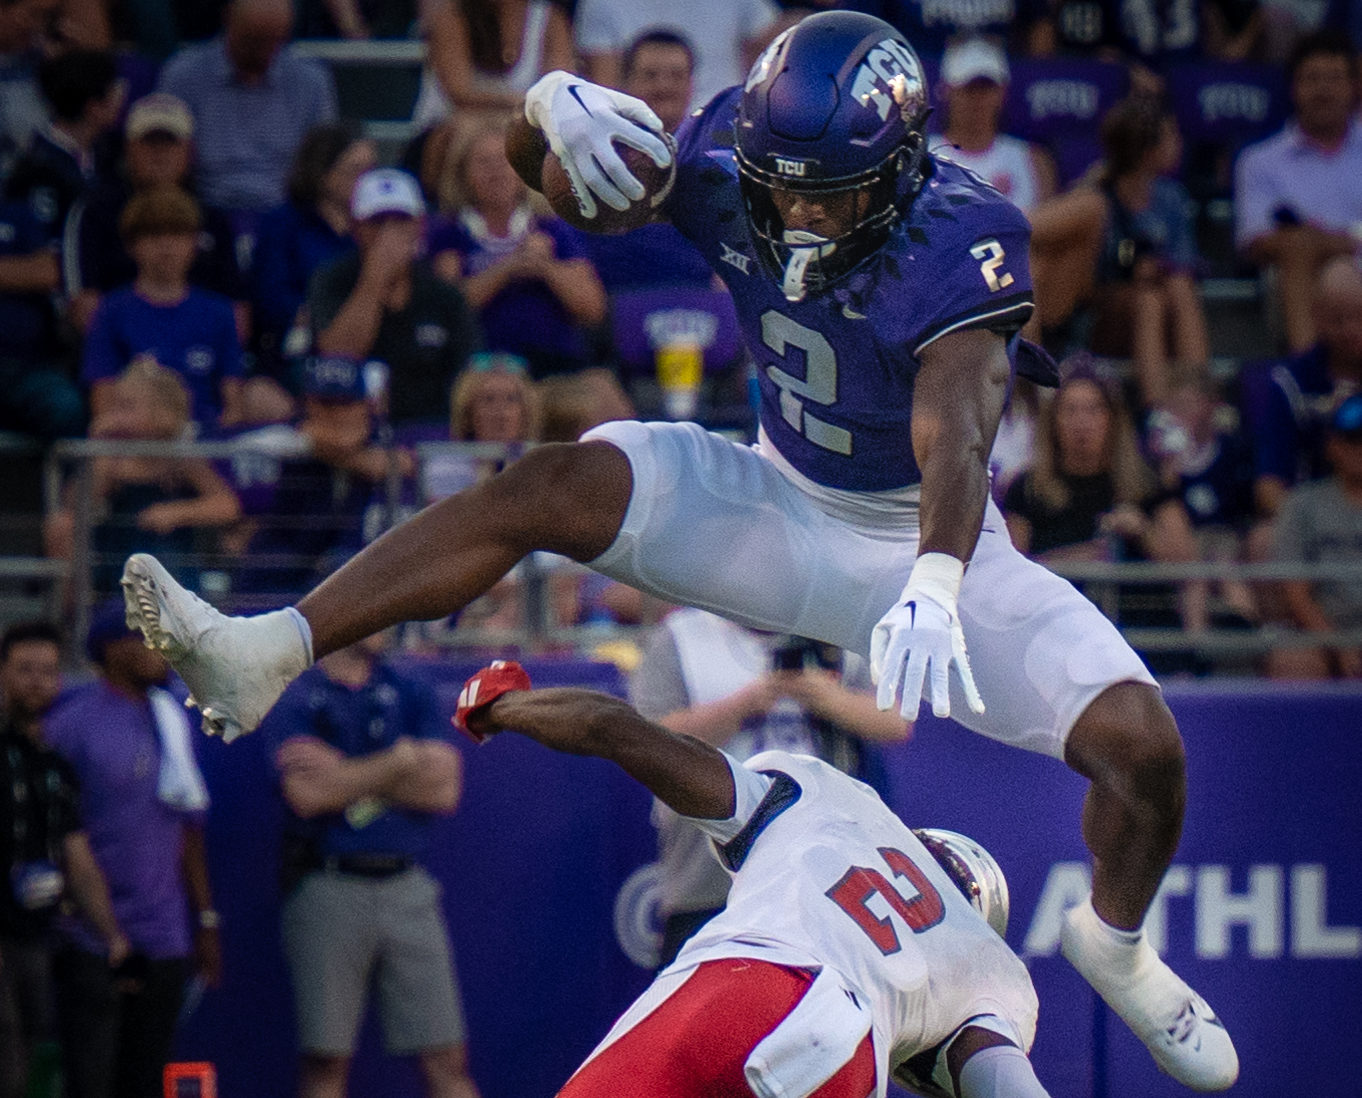 TCU+Football+bounces+back+with+a+35-point+win+over+Nicholls+State%2C+41-6.